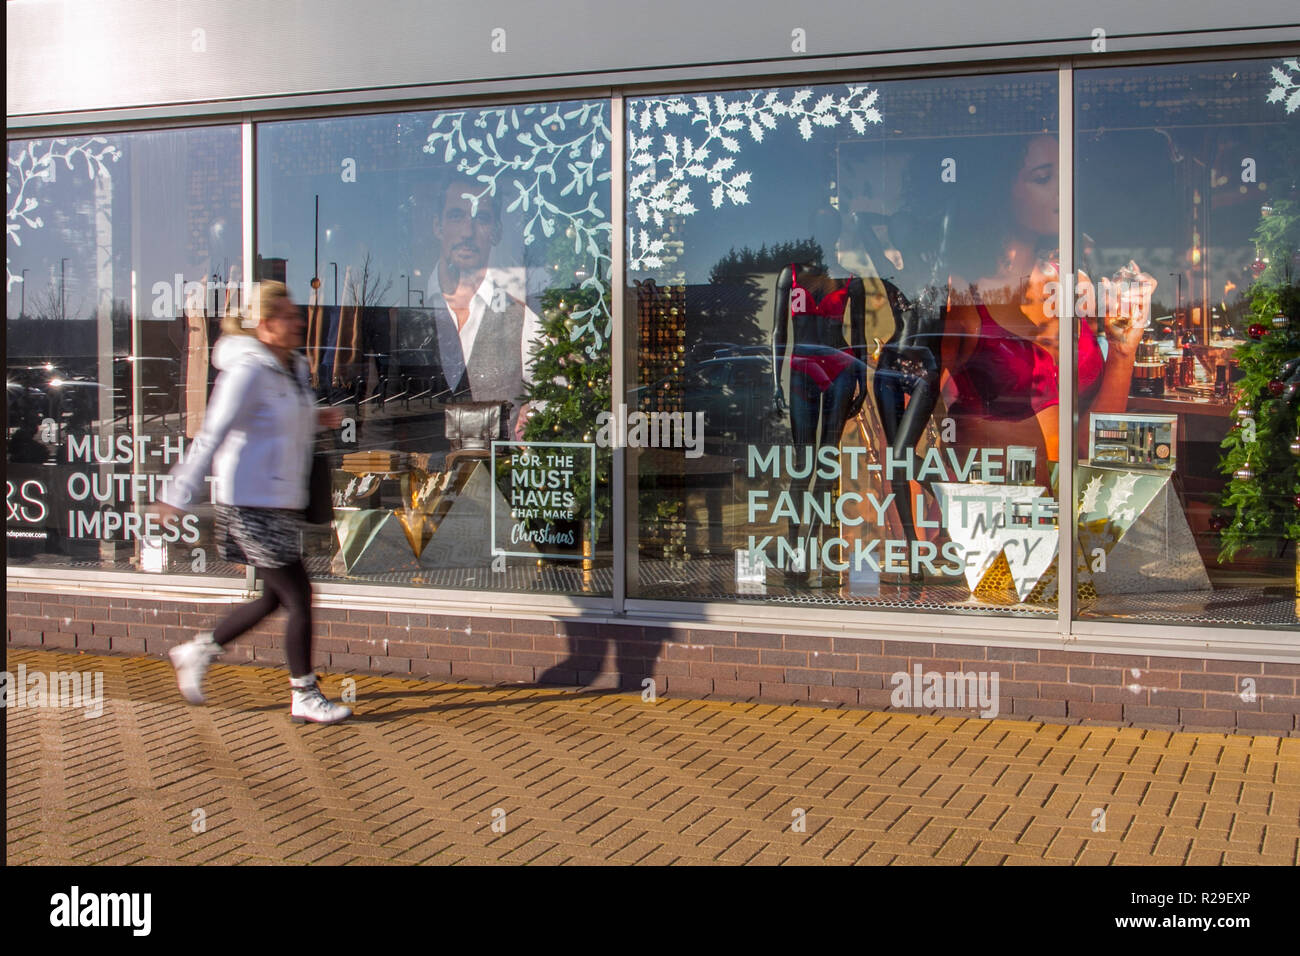 https://c8.alamy.com/comp/R29EXP/preston-lancashire-uk-ms-store-fancy-little-knickers-display-in-preston-retail-park-feminists-have-described-a-marks-spencer-window-display-that-suggests-women-must-have-fancy-little-knickers-as-sexist-and-vomit-inducing-the-display-at-a-nottingham-store-is-juxtaposed-with-one-which-suggests-men-must-have-outfits-to-impress-a-campaigner-altered-the-window-so-that-it-read-full-human-rights-instead-of-knickers-ms-said-the-displays-were-part-of-a-wider-campaign-that-featured-a-variety-of-must-haves-credit-mediaworldimagesalamylivenews-R29EXP.jpg